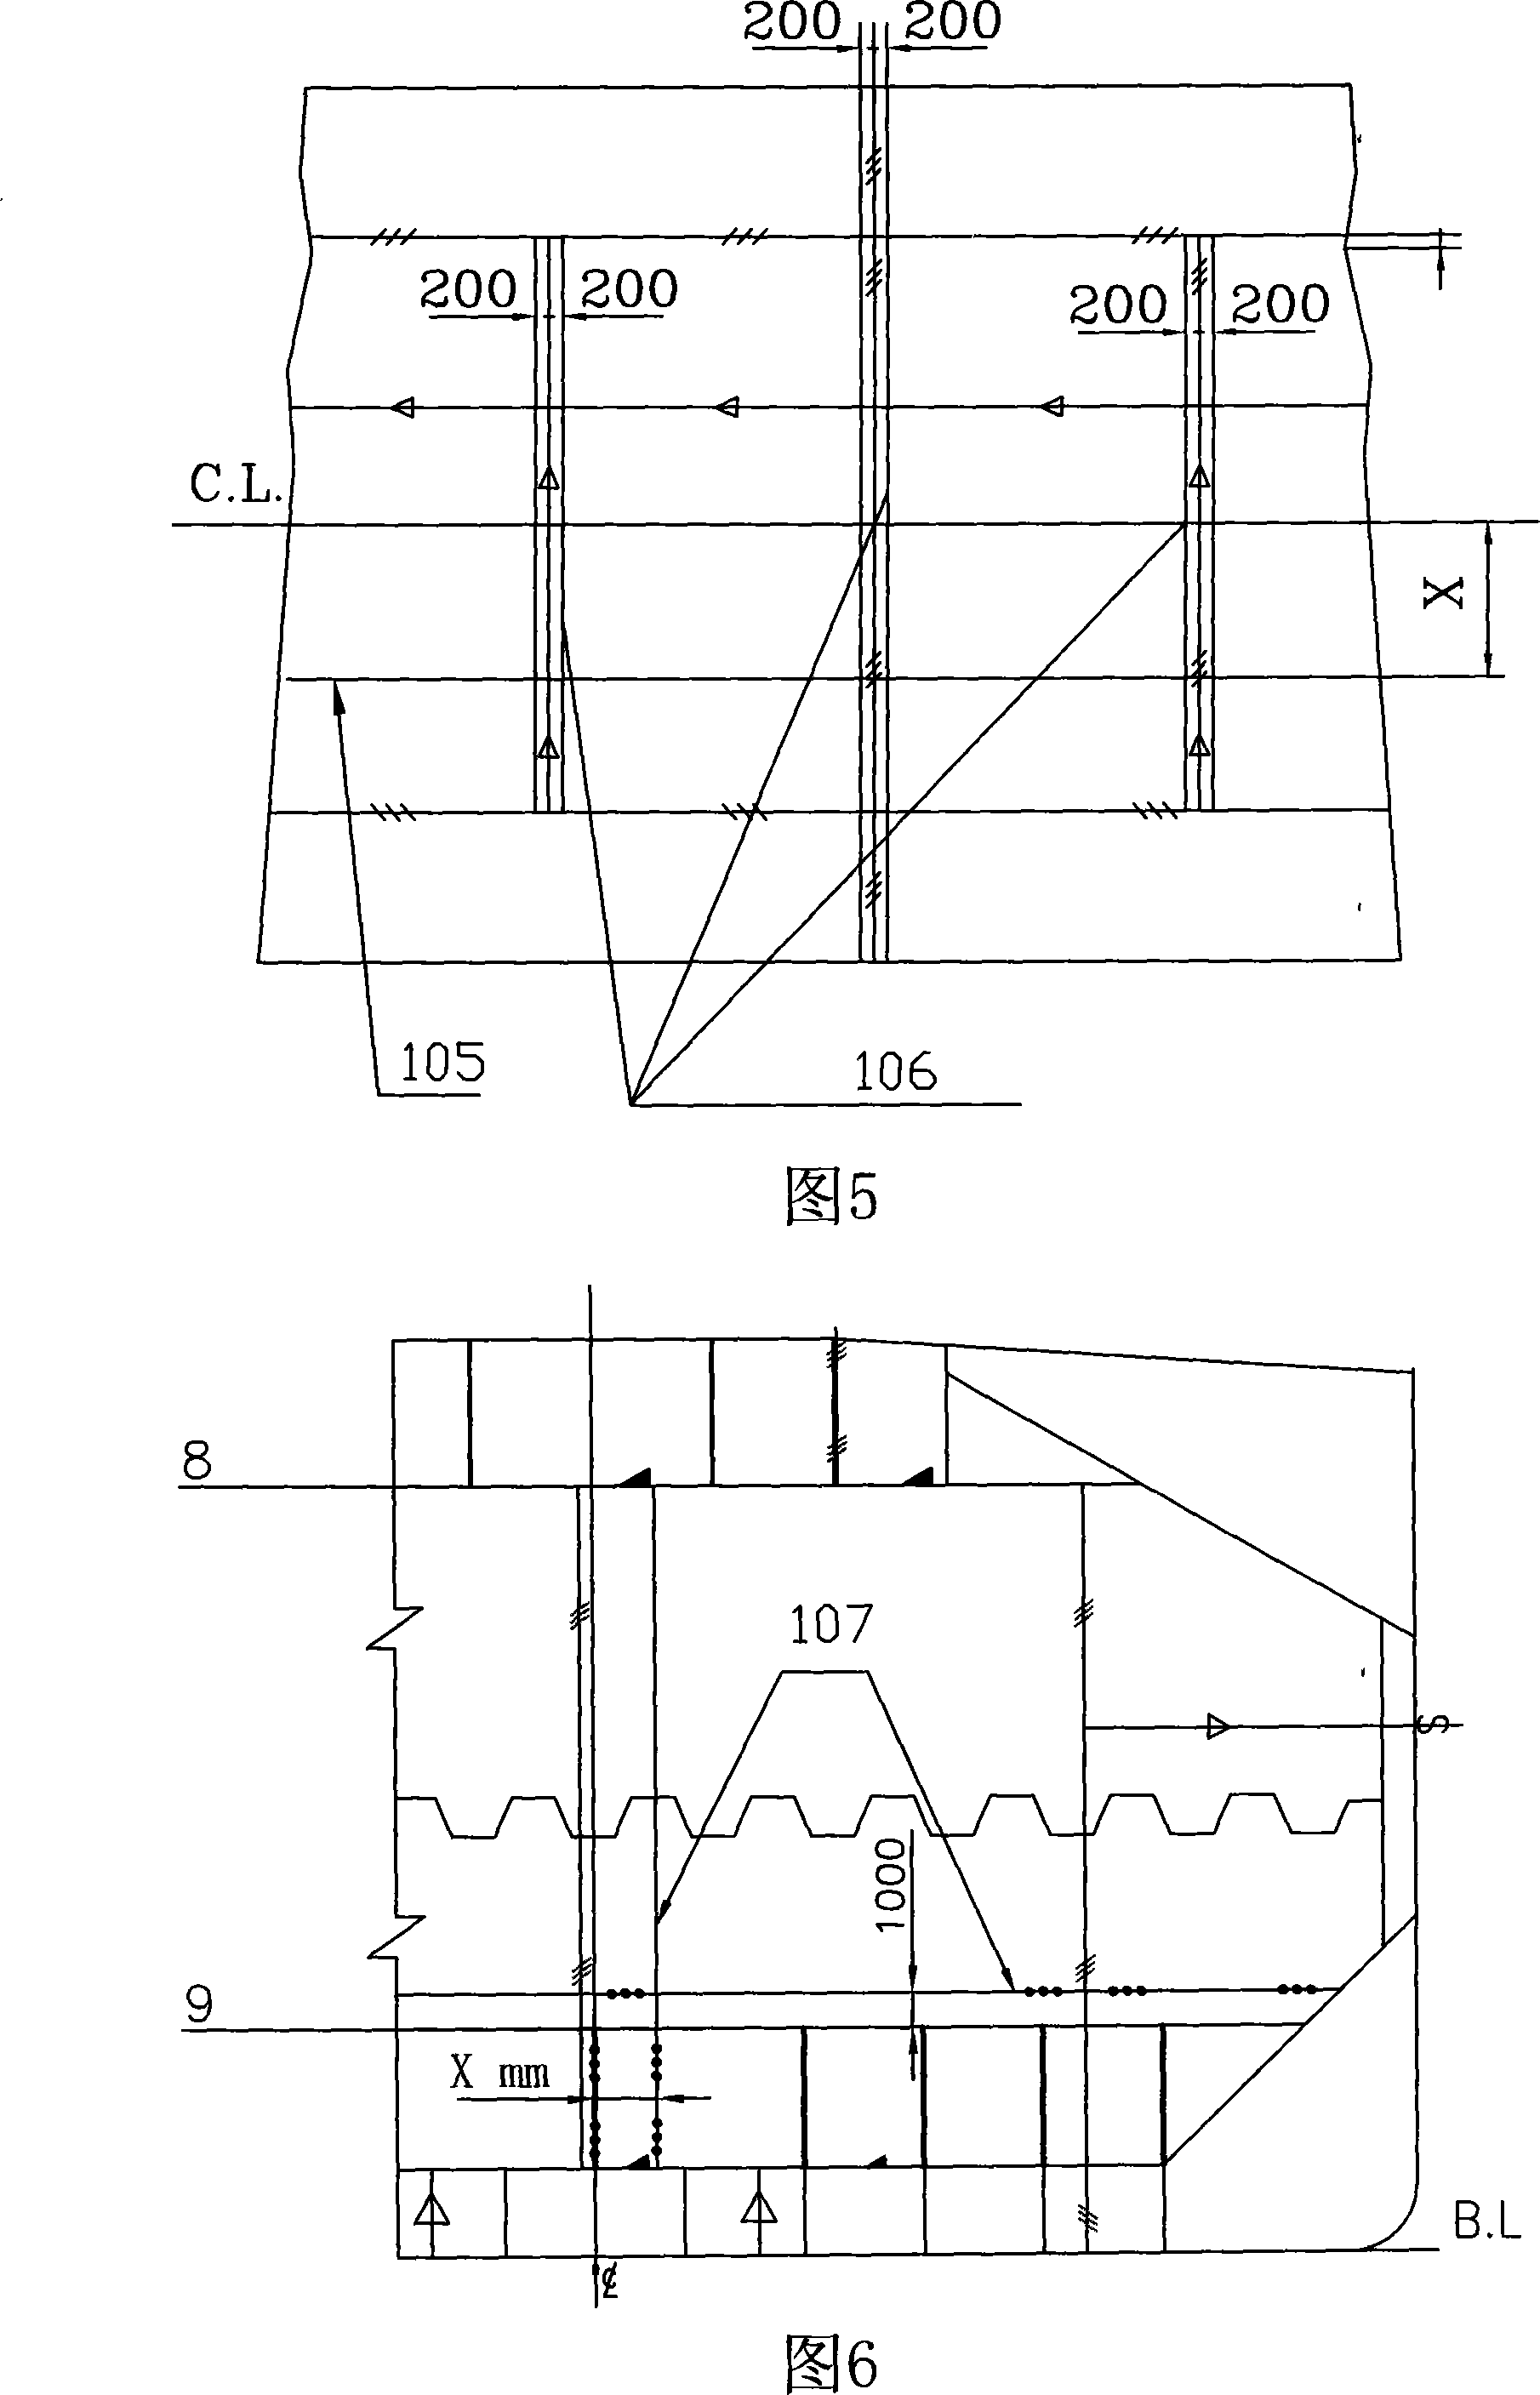 Method for rapidly detecting accuracy of position seaming in shipbuilding process